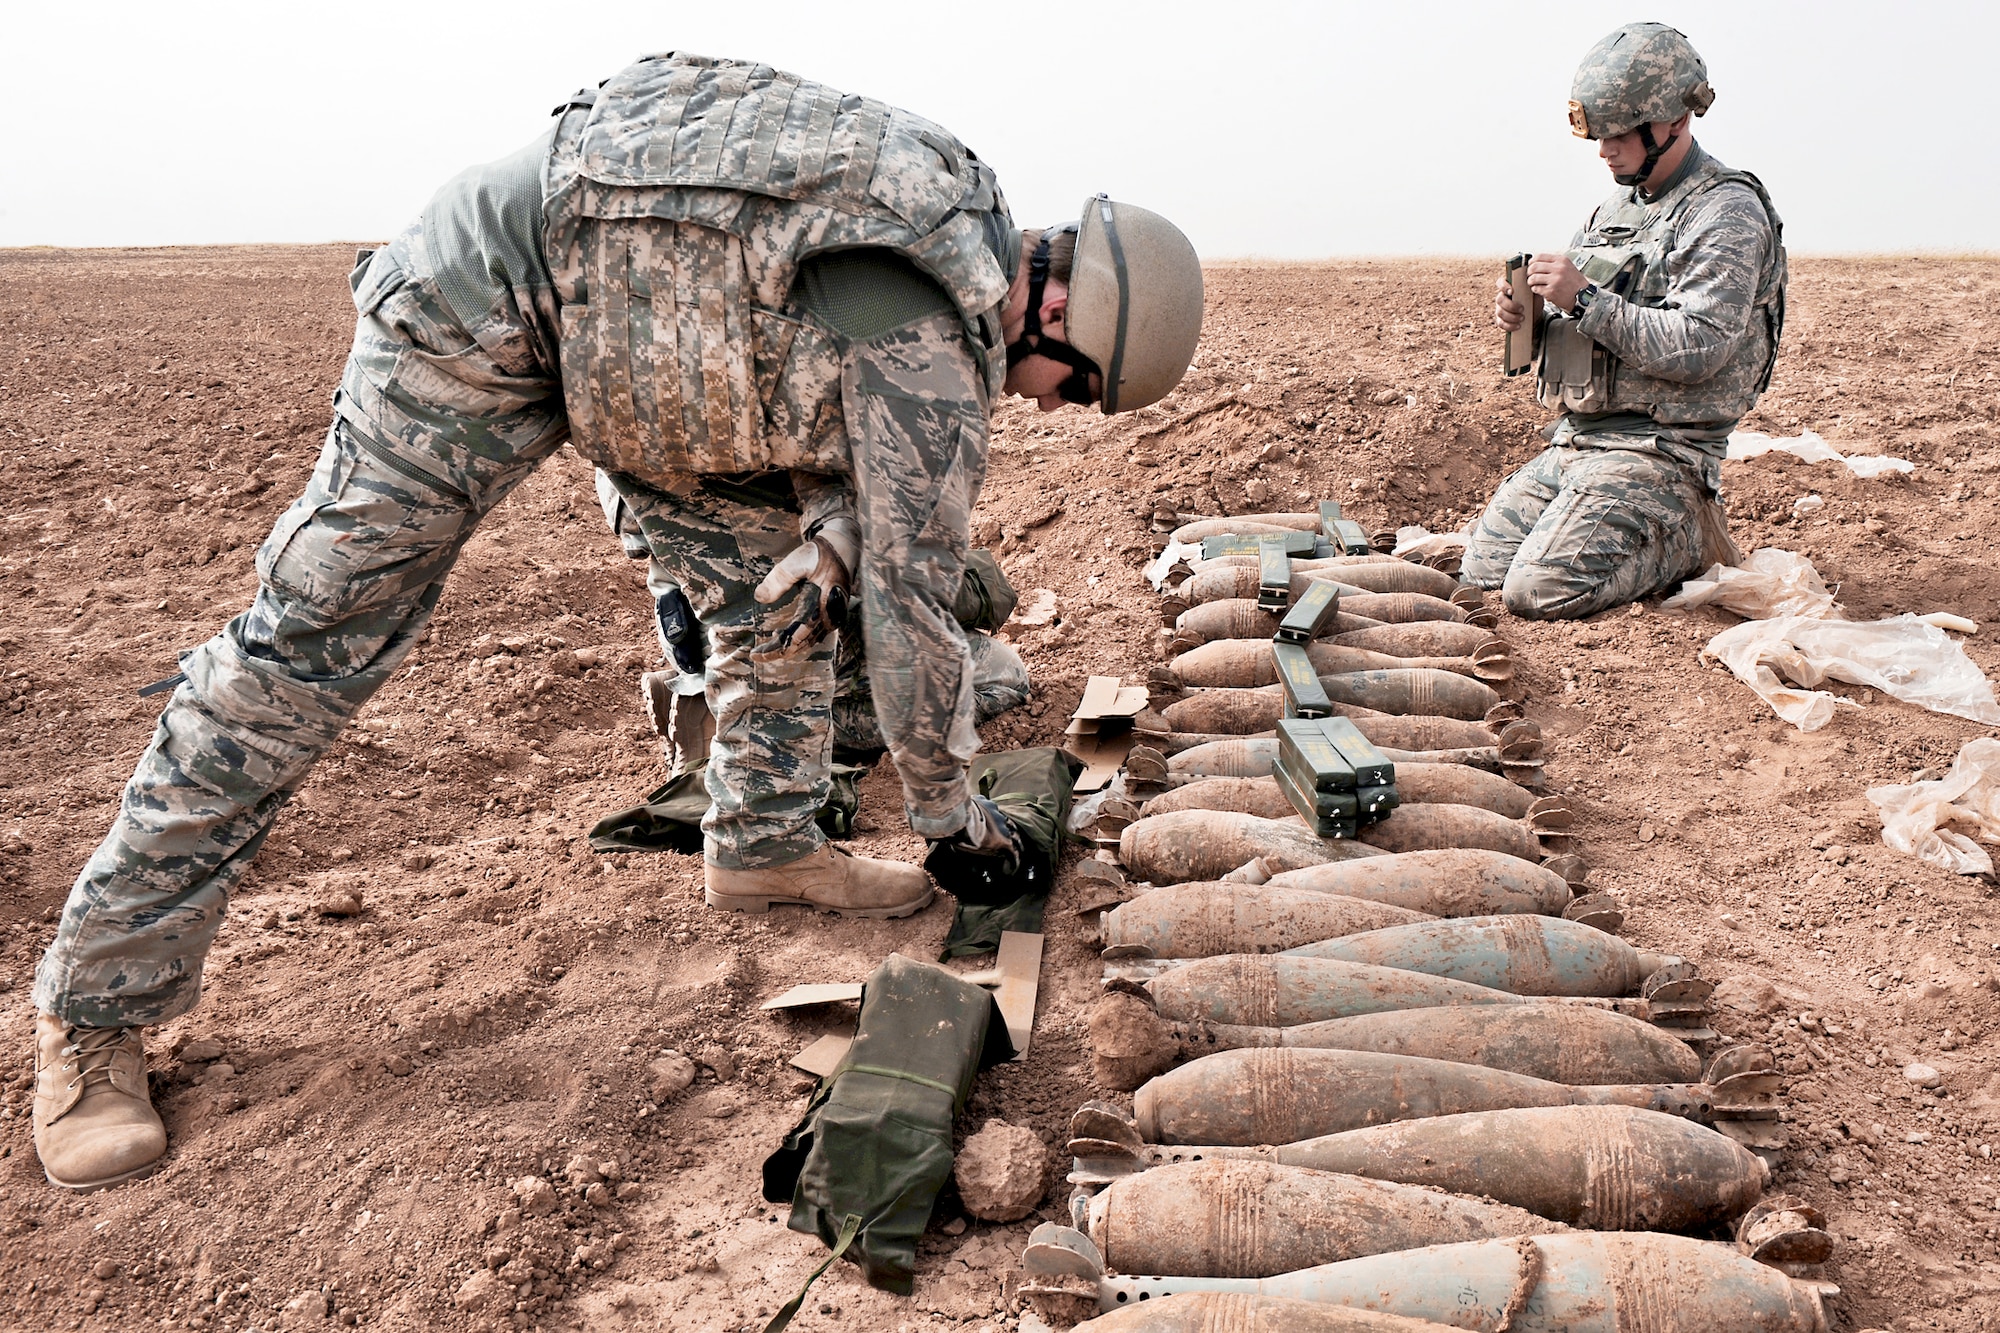 Staff Sgt. Matt Skelton (left) and Staff Sgt. Charles Hodge prepare to detonate 120-mm Russian mortar rounds April 13, 2010, in a desolate area of Iraq.  The two explosive ordnance disposal NCOs are with the 506th Civil Engineer Squadron at Joint Base Balad, Iraq. (U.S. Navy photo/Petty Officer 2nd Class Matthew D. Leistikow) 